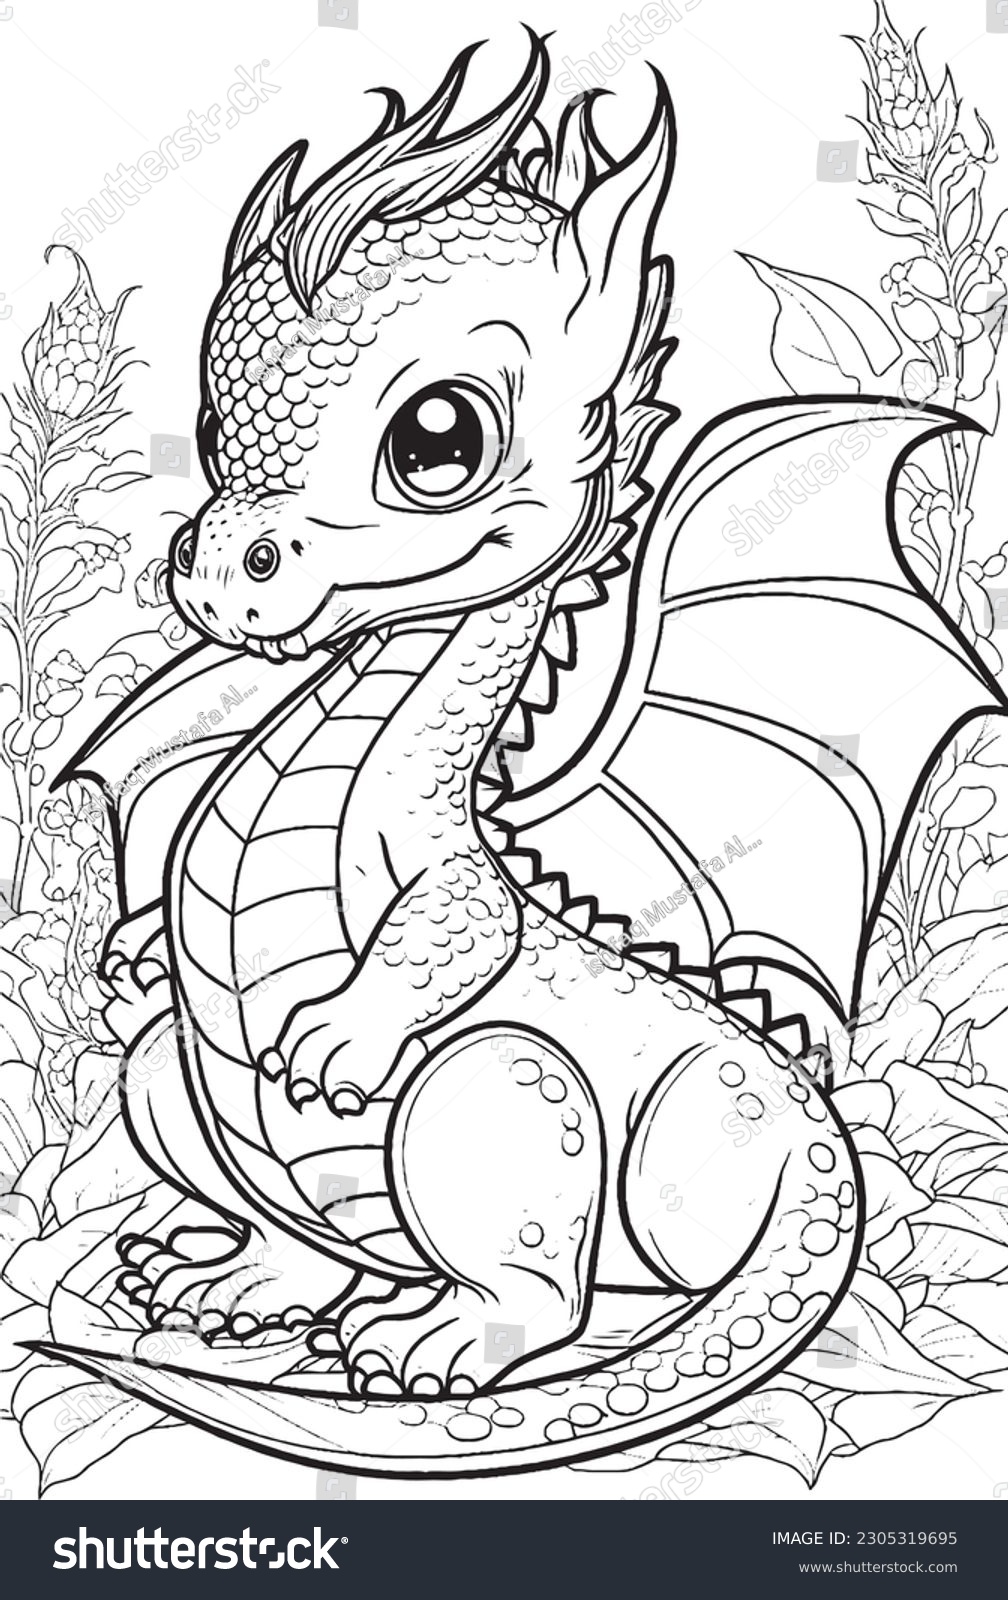 Cute dragon coloring pages kids adults stock vector royalty free